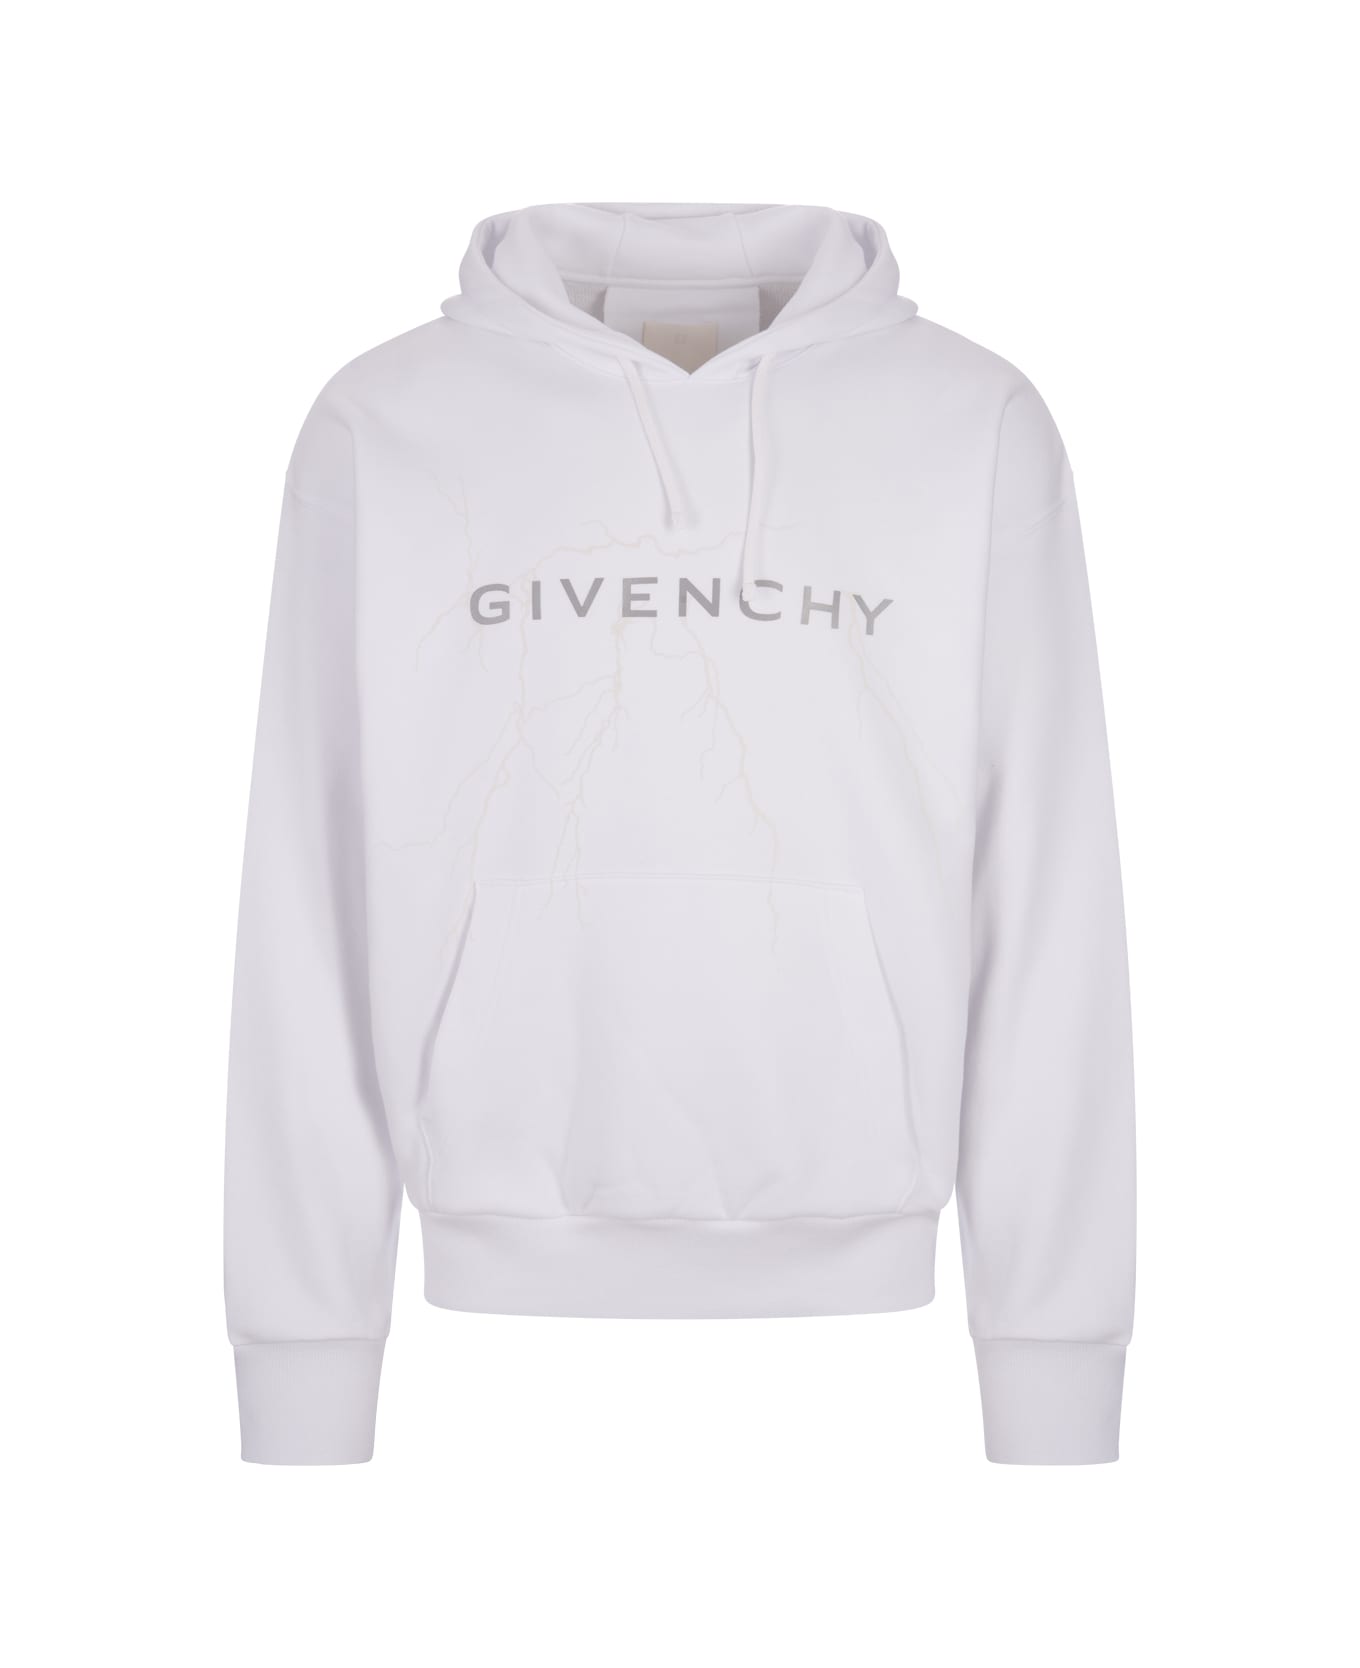 Givenchy White Givenchy Hoodie With Print - White フリース